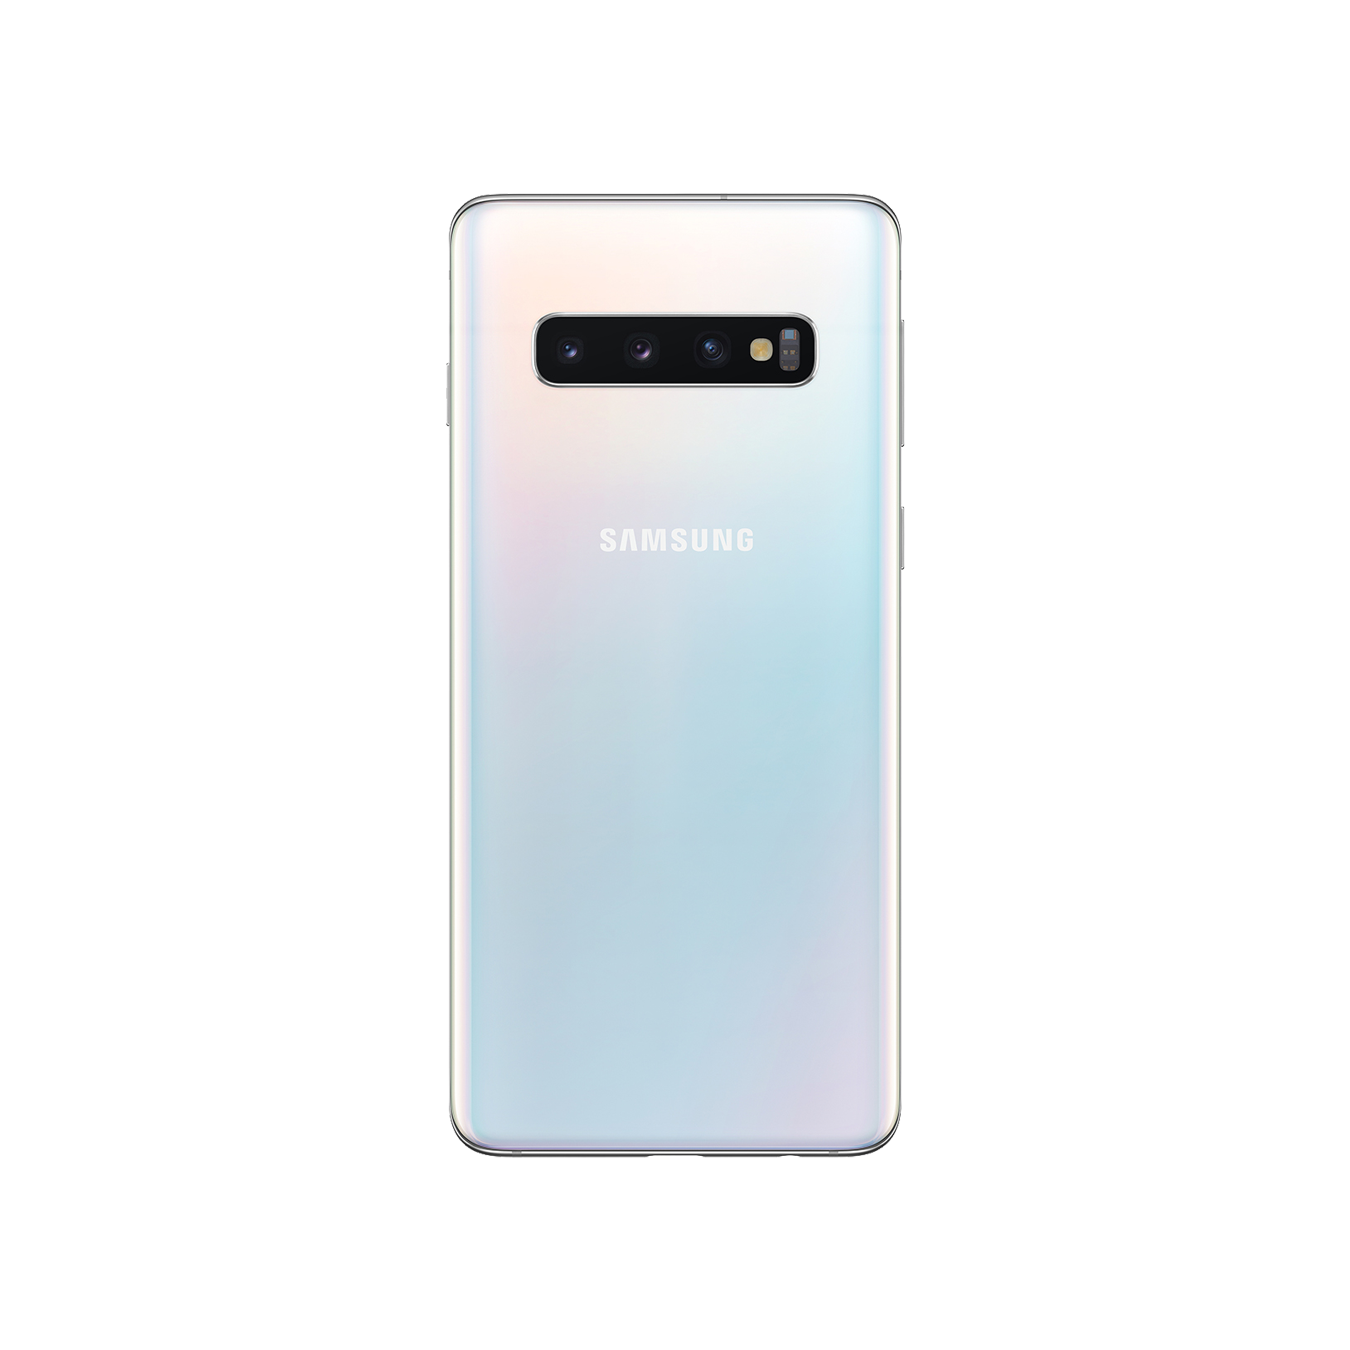 Samsung Galaxy S10 Plus IMEI repair service to fix bad or blacklisted IMEI, ensuring full functionality and connectivity, available at cleanimei.com